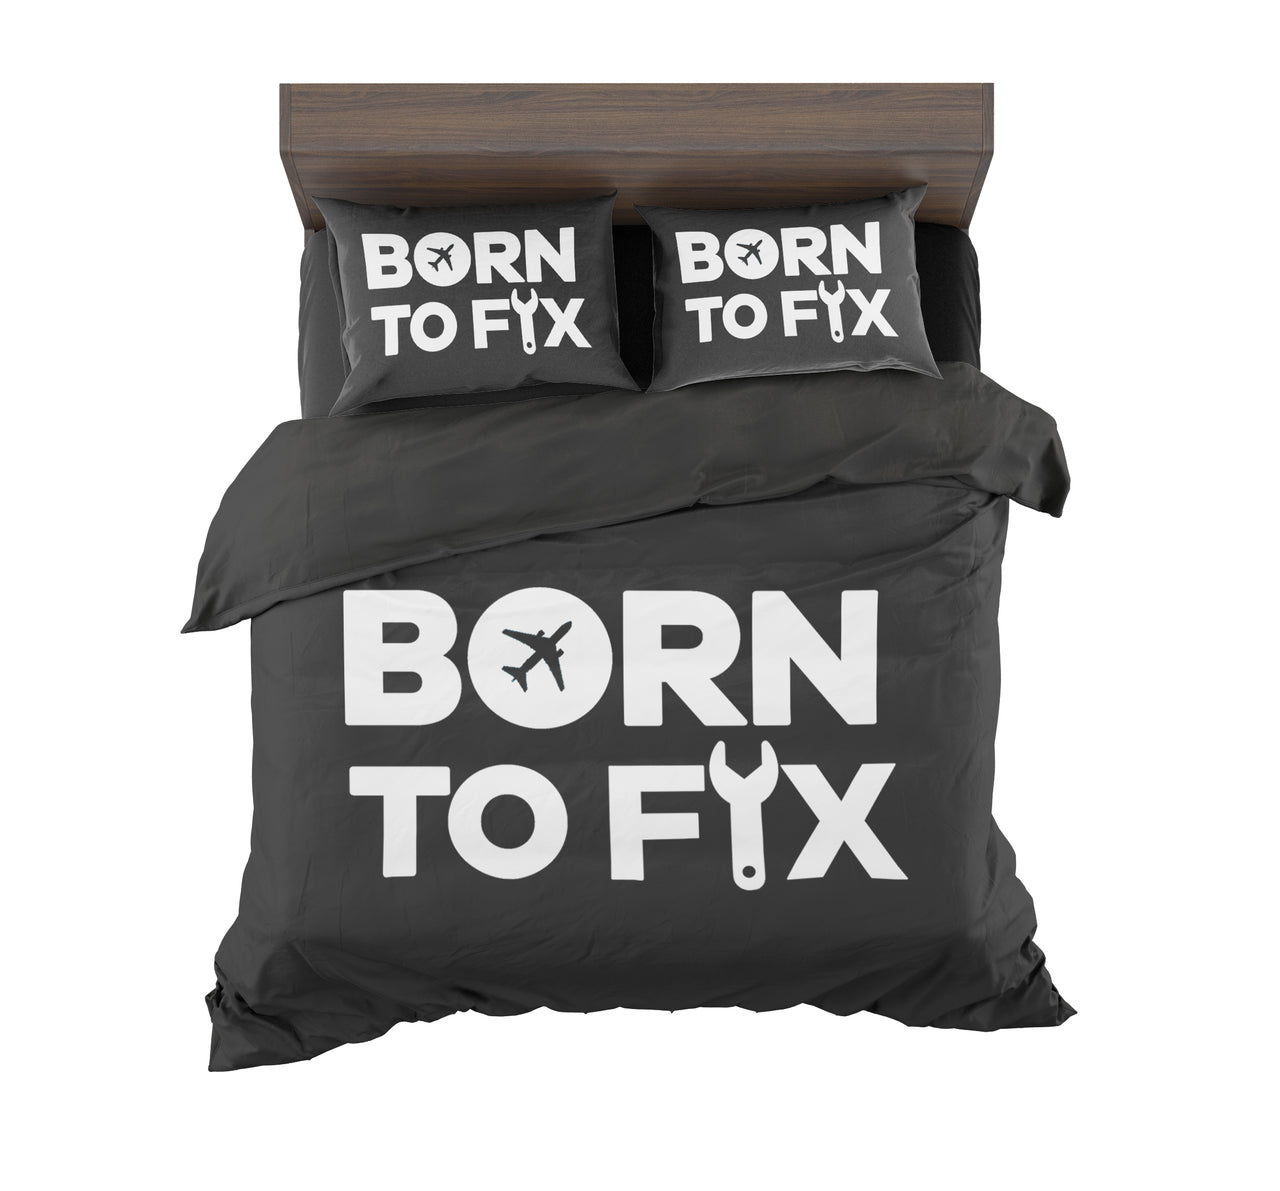 Born To Fix Airplanes Designed Bedding Sets